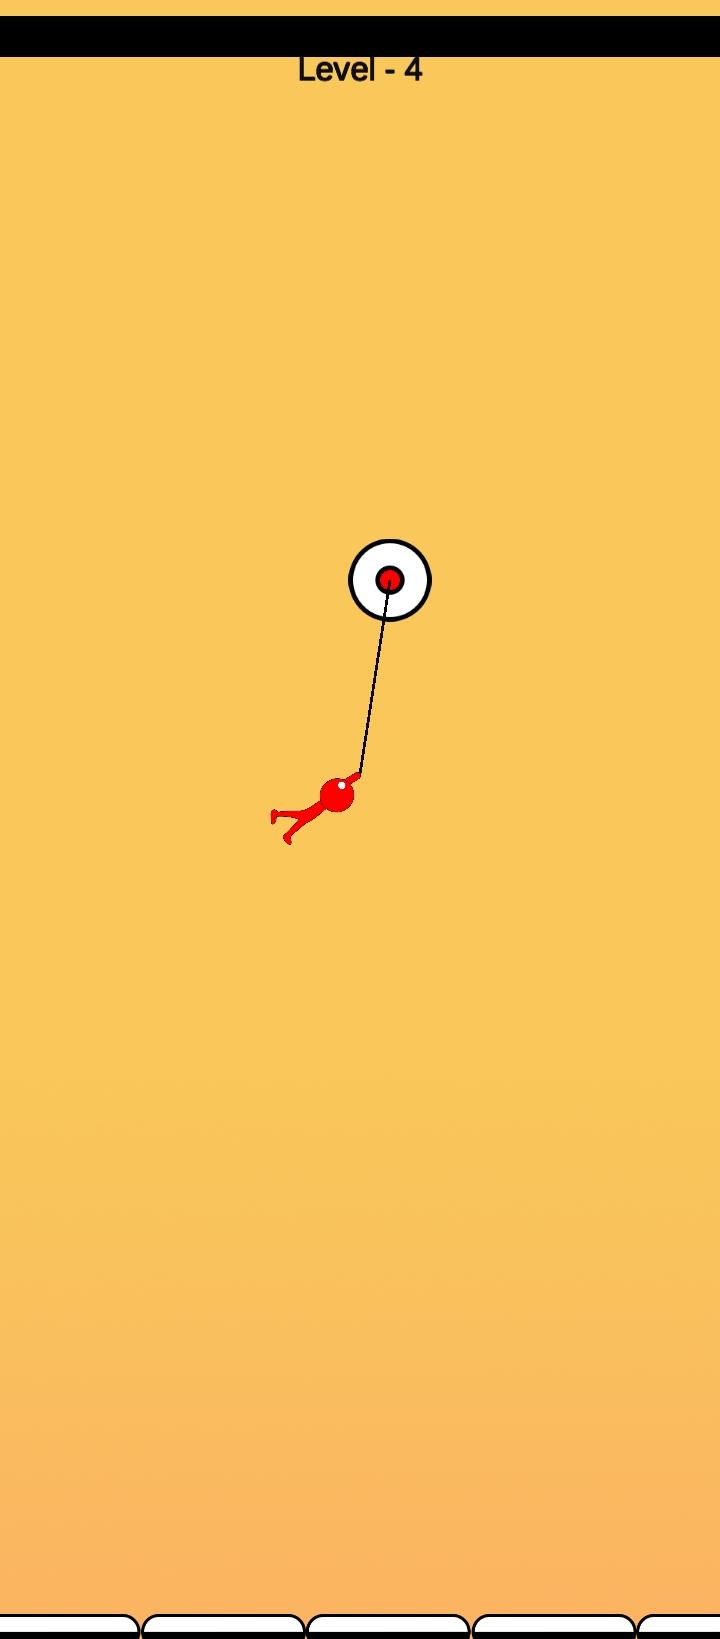 Stickman Hook - APK Download for Android